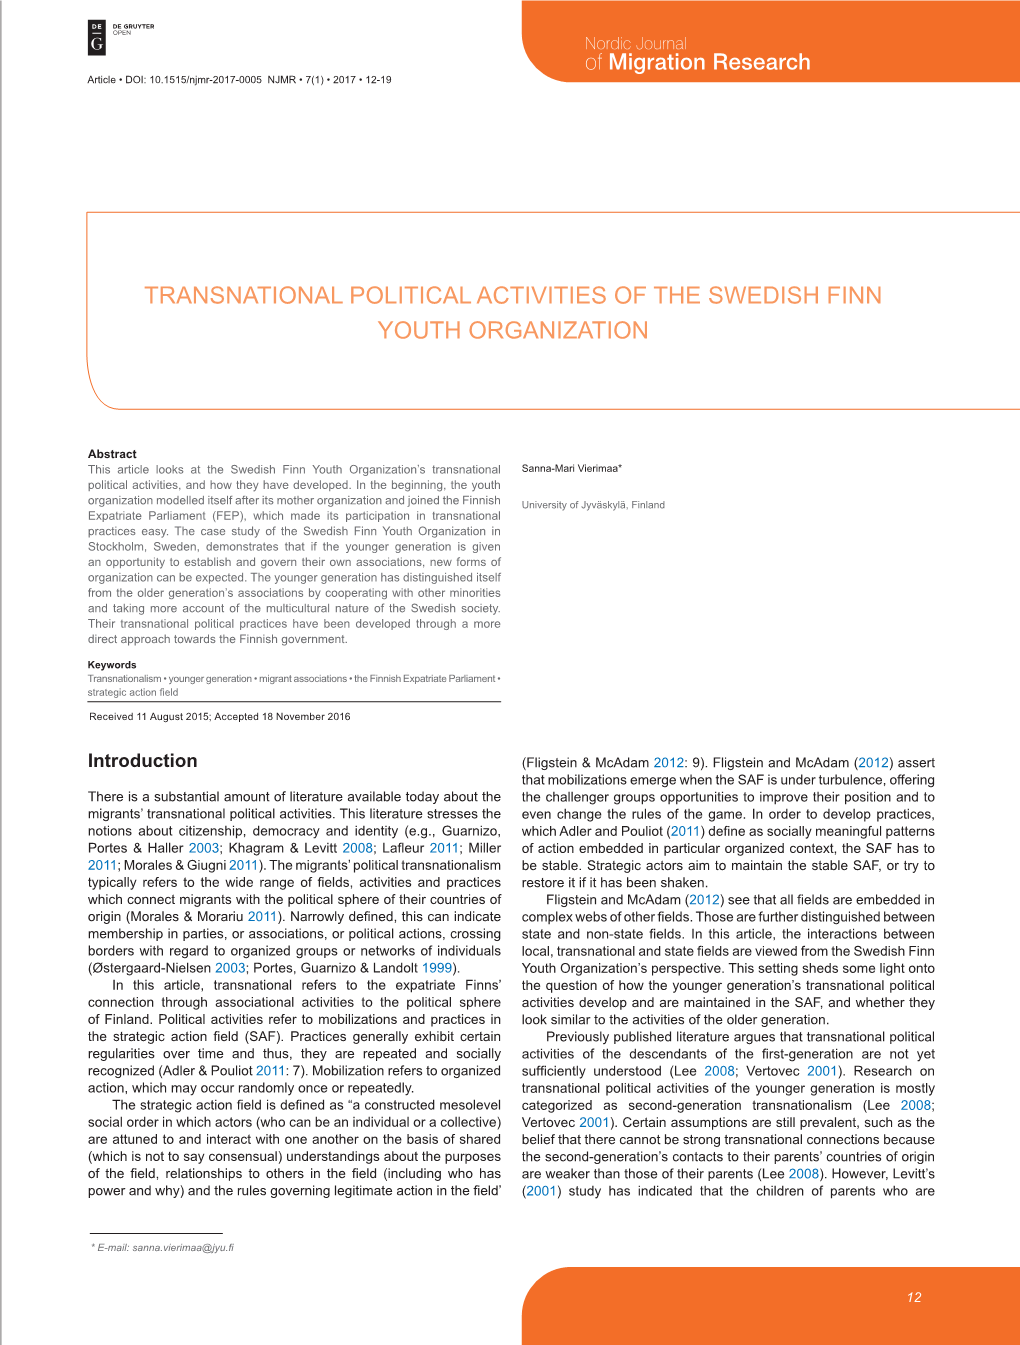 Transnational Political Activities of the Swedish Finn Youth Organization